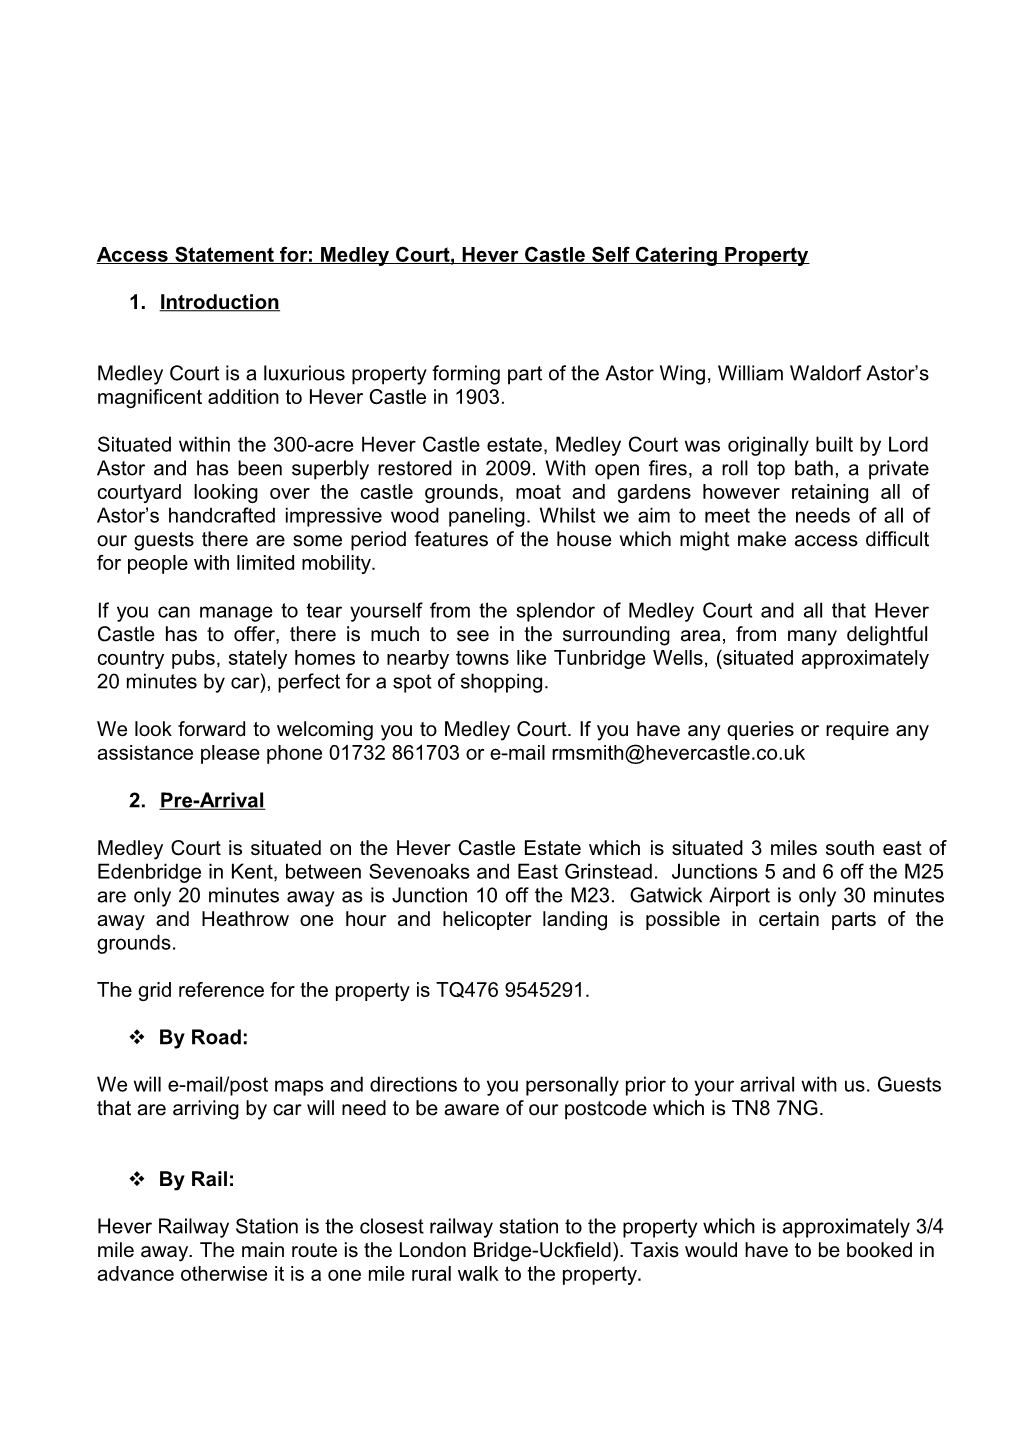 Access Statement For: Medley Court, Hever Castle Self Catering Property